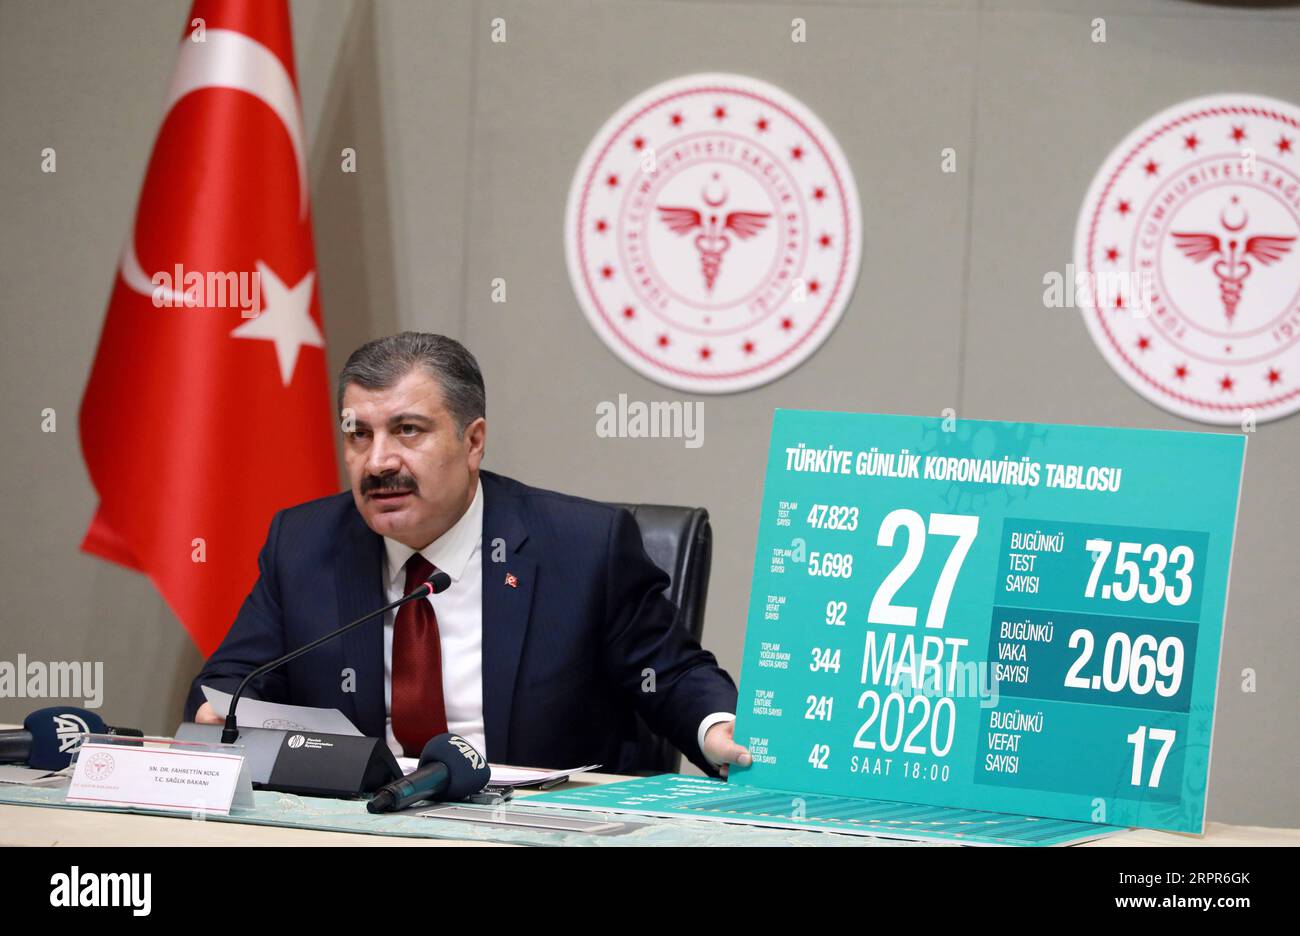 200327 -- ANKARA, March 27, 2020 Xinhua -- Turkish Health Minister Fahrettin Koca speaks at a press conference in Ankara, Turkey, on March 27, 2020. Fahrettin Koca announced 2,069 new COVID-19 cases on Friday, bringing the total number of infections to 5,698 in the country. Photo by Mustafa Kaya/Xinhua TURKEY-ANKARA-COVID-19-CASES PUBLICATIONxNOTxINxCHN Stock Photo